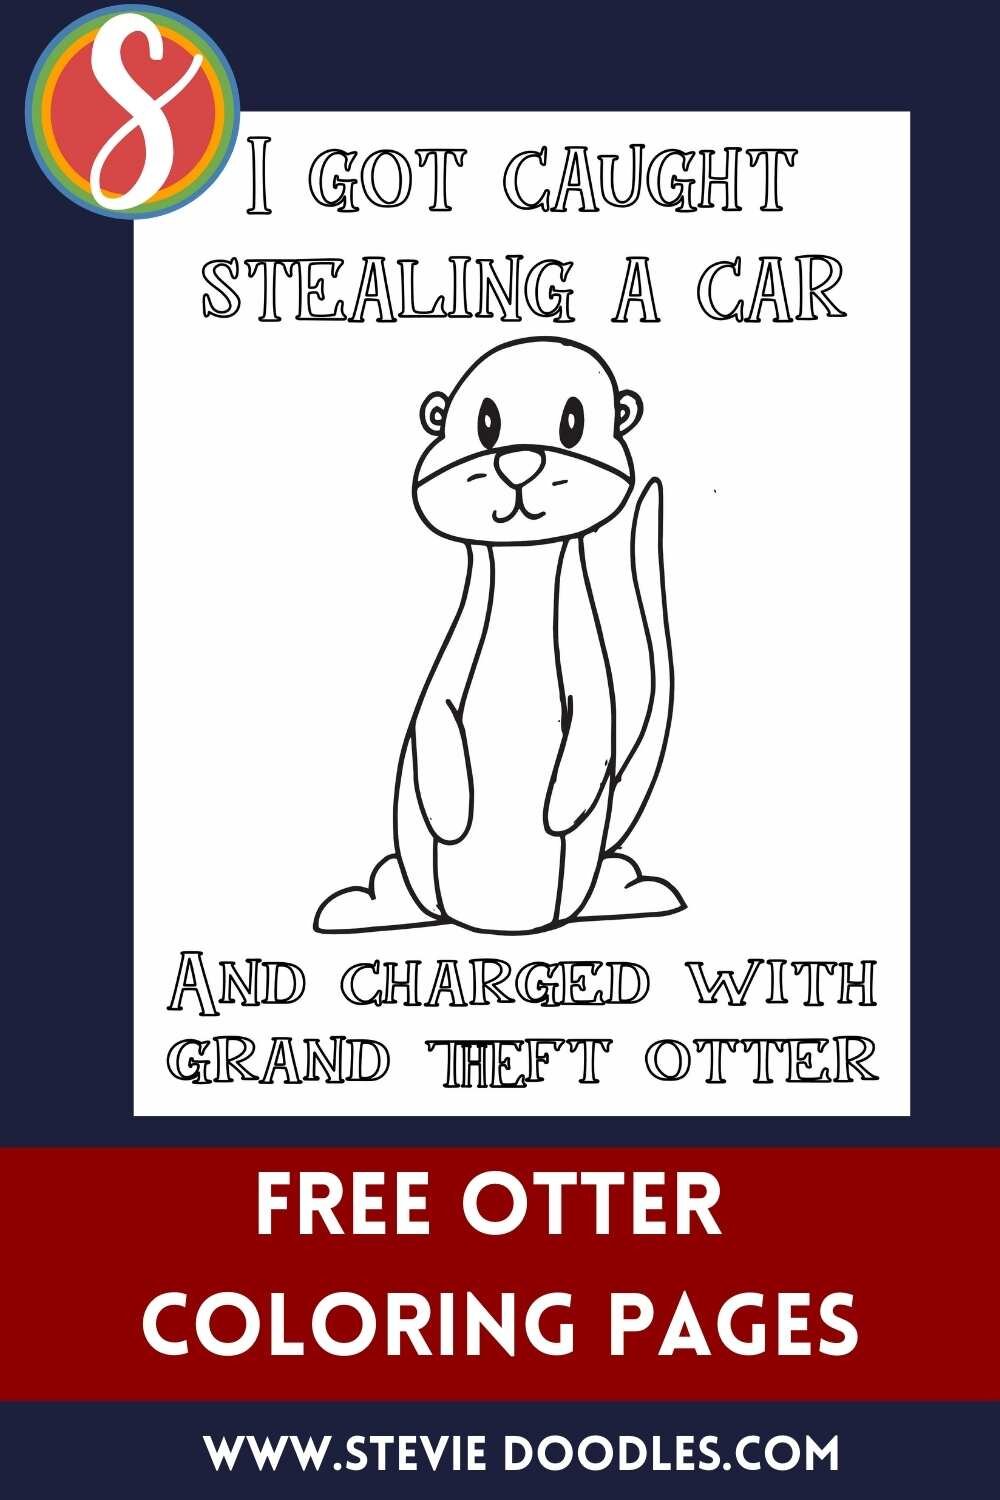 Free otter joke coloring page from Stevie Doodles